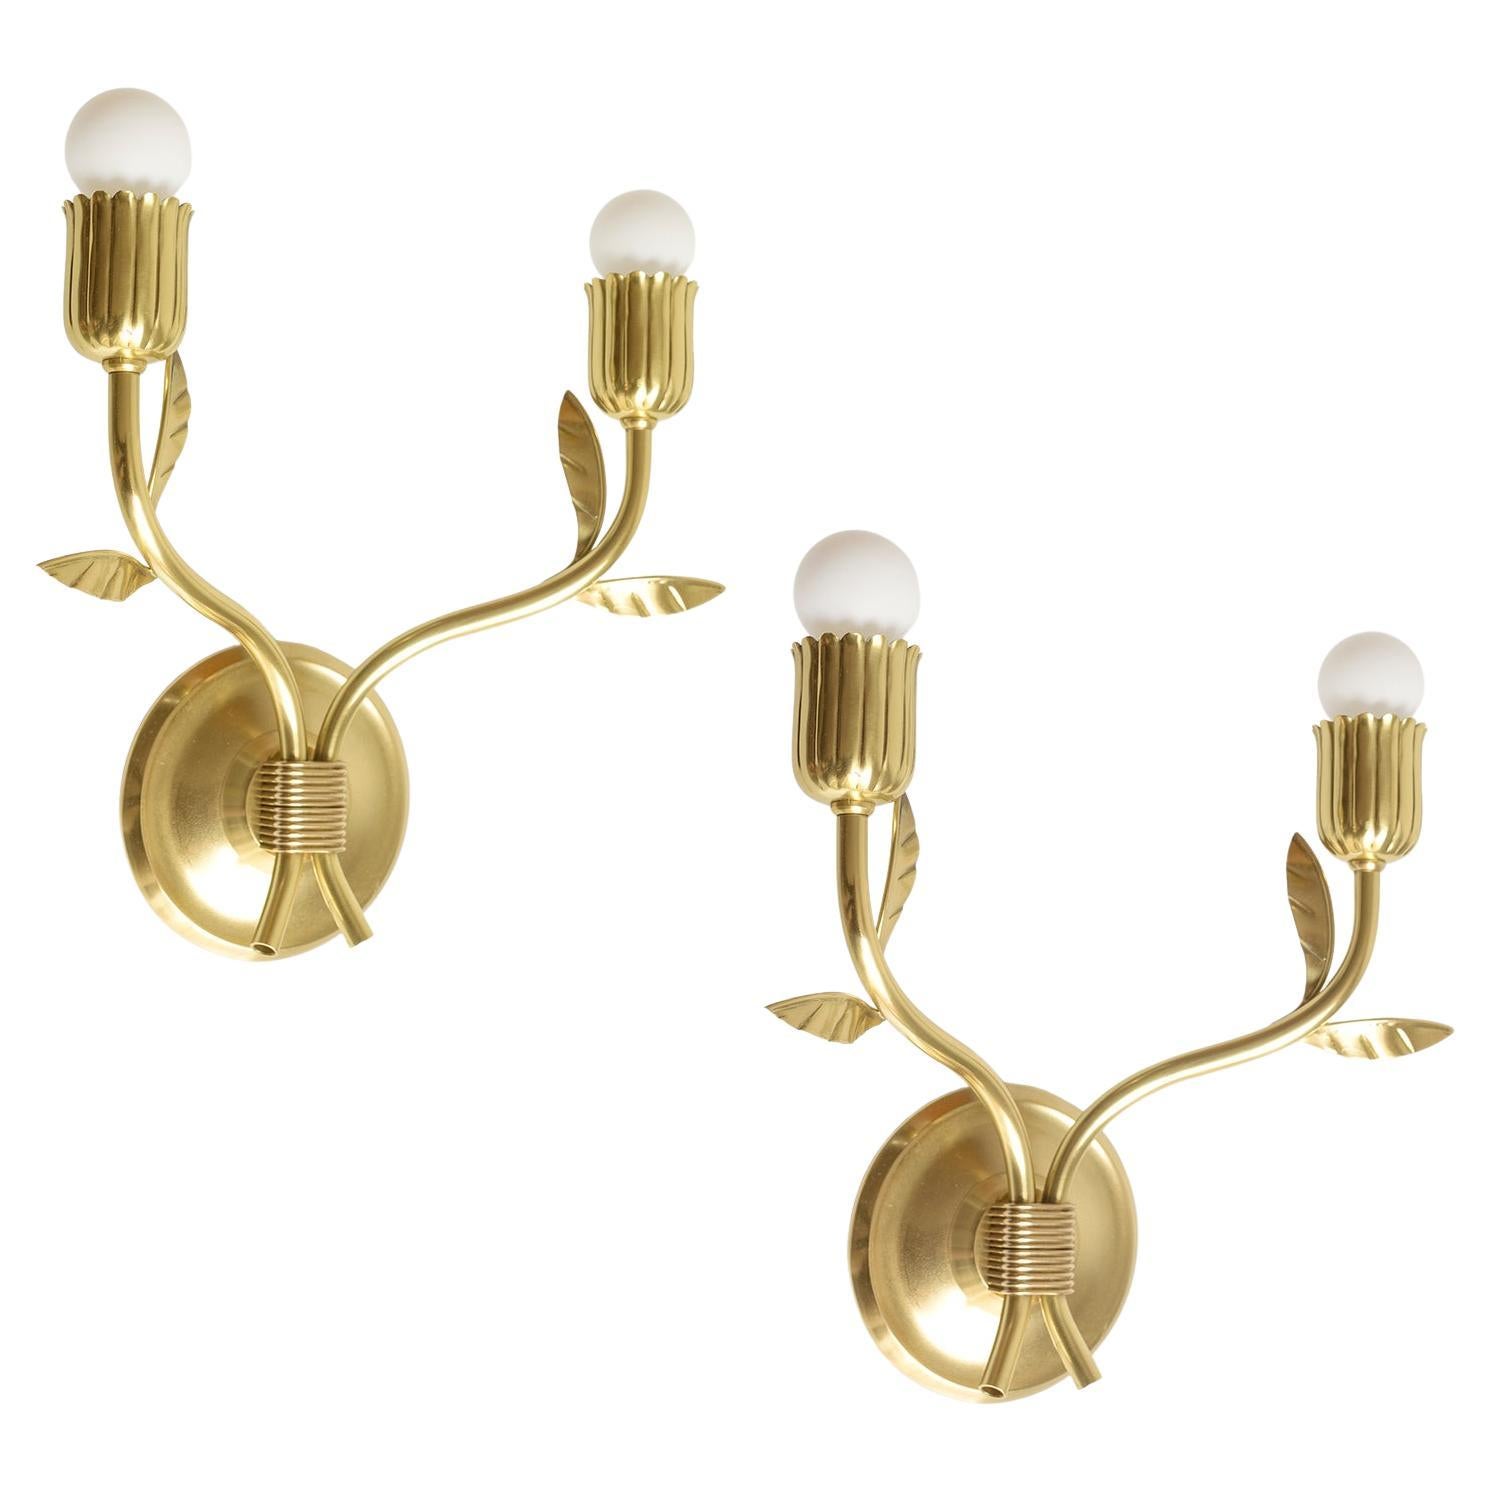 Pair of Scandinavian Modern Floral Double Arm Sconces in Brass